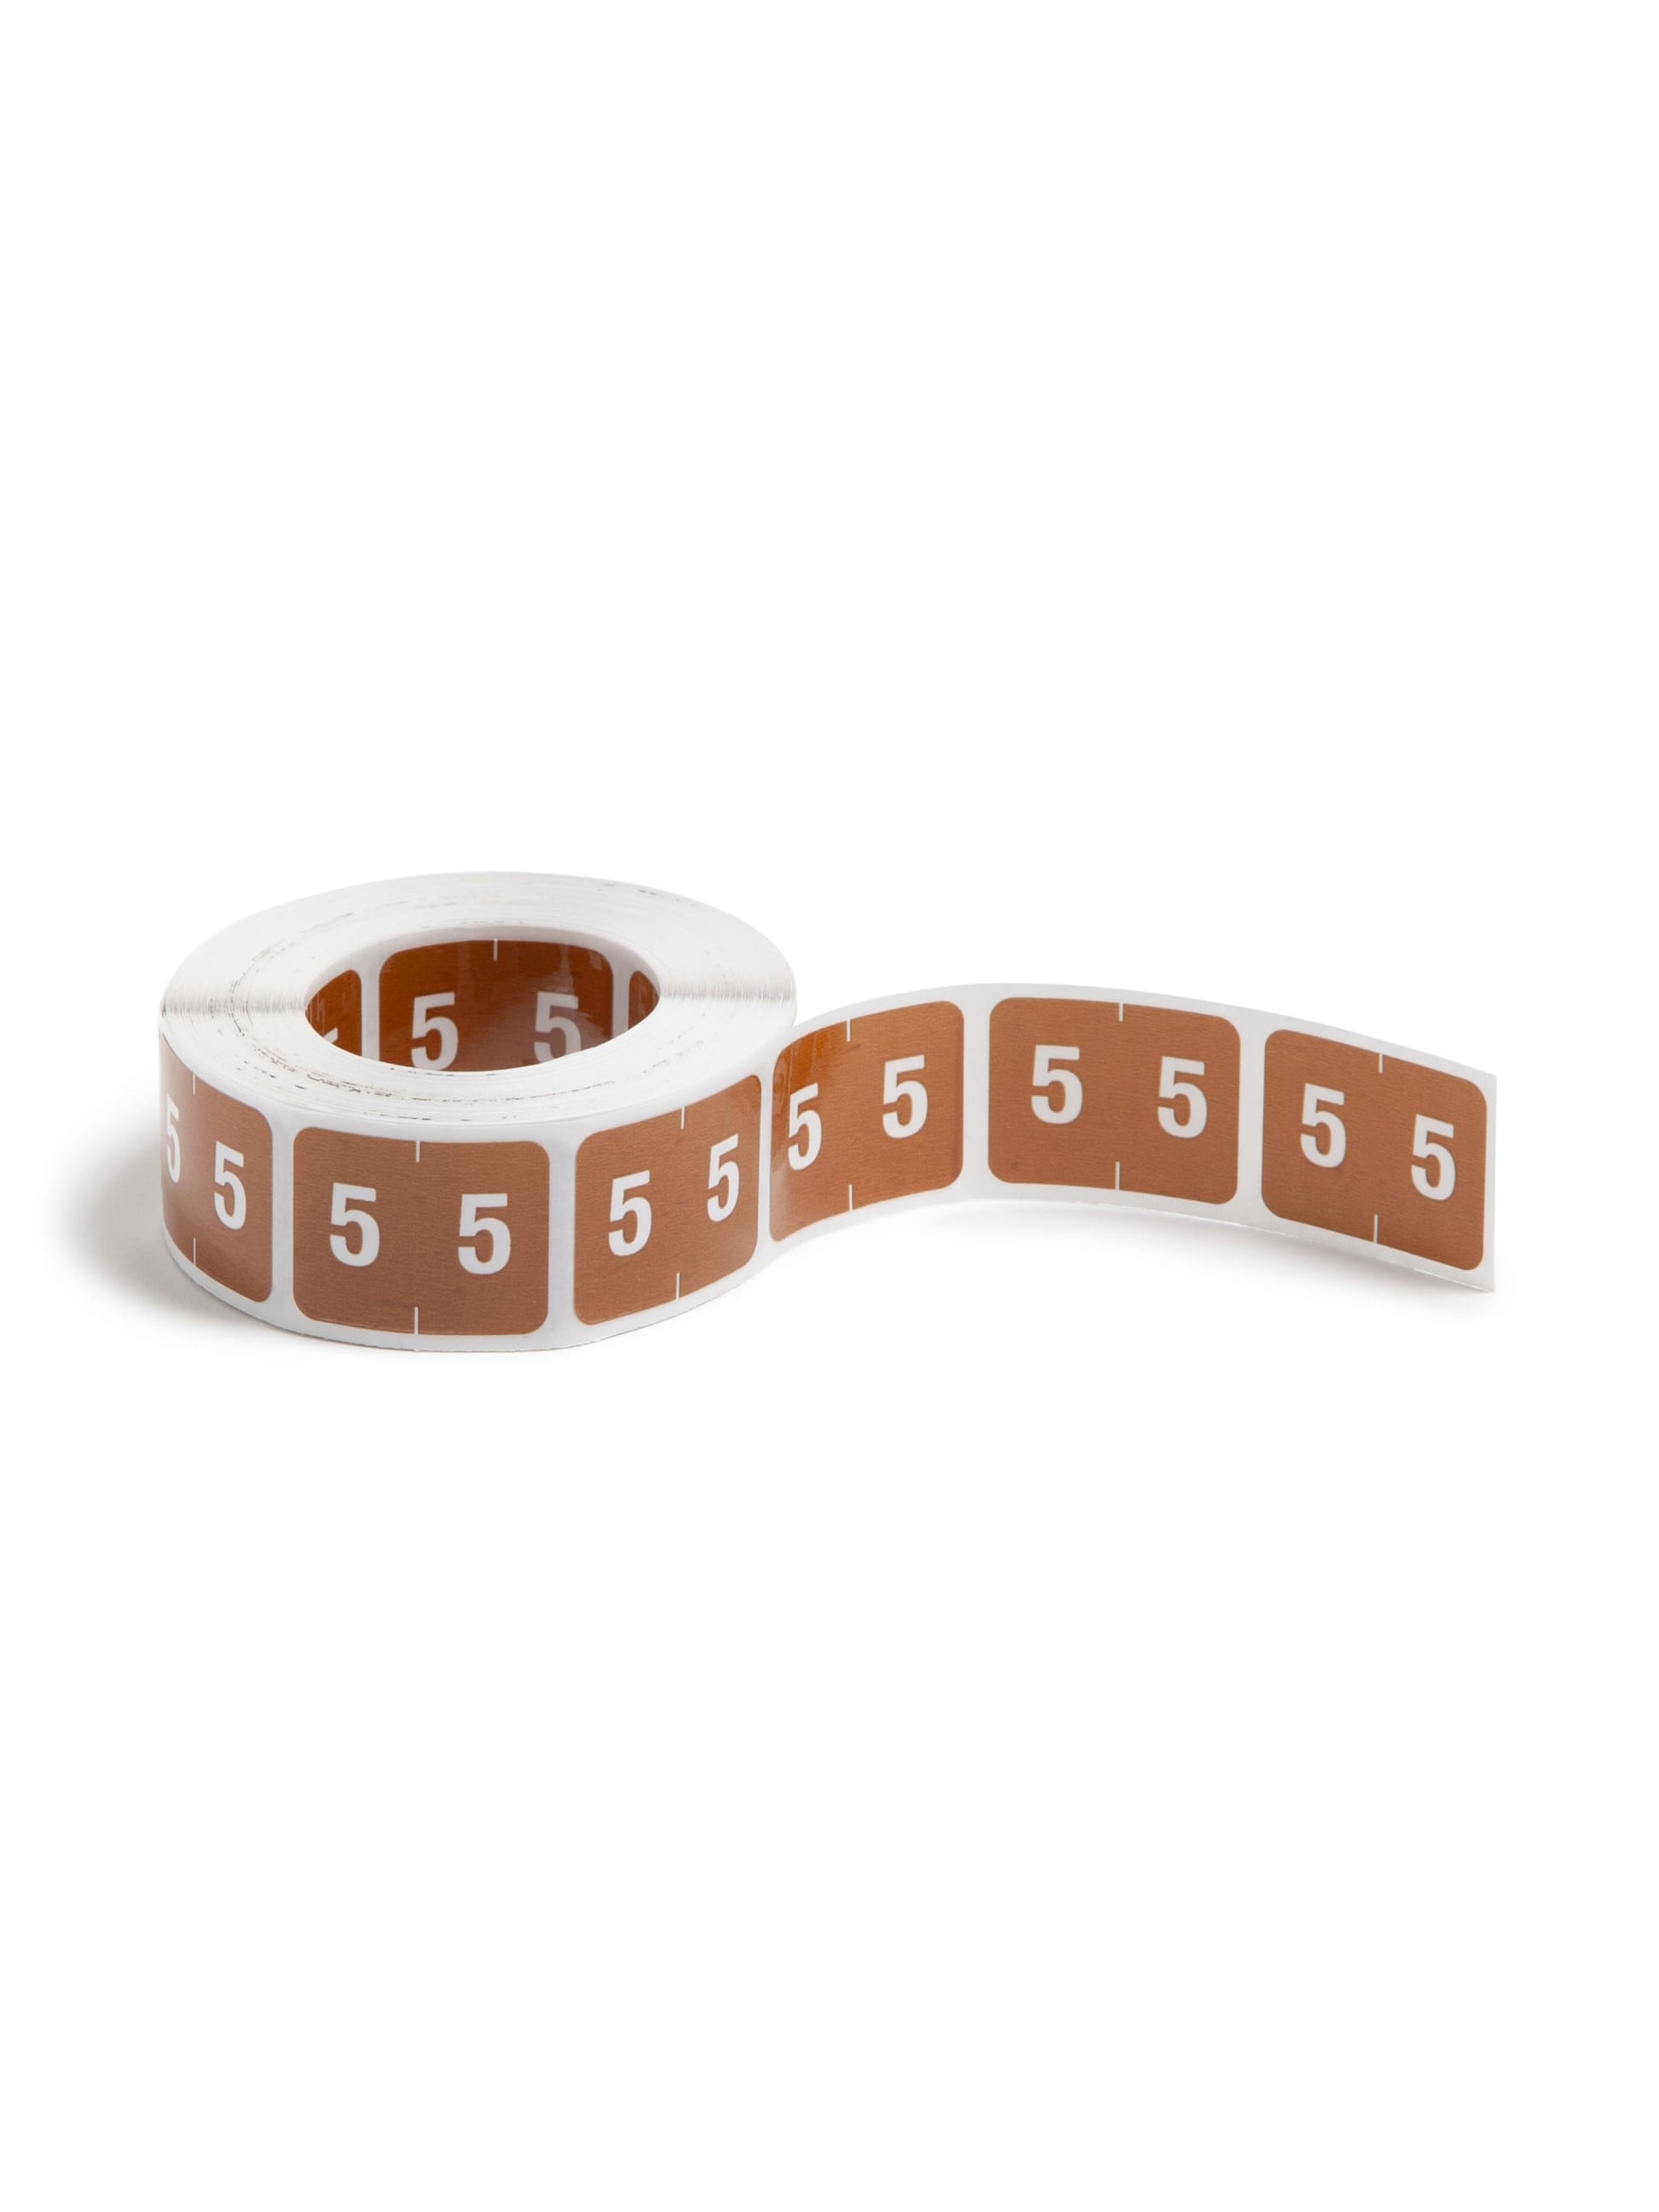 DCCRN Color-Coded Numeric Labels - Rolls, Brown Color, 1-1/4" X 1" Size, Set of 1, 086486673457